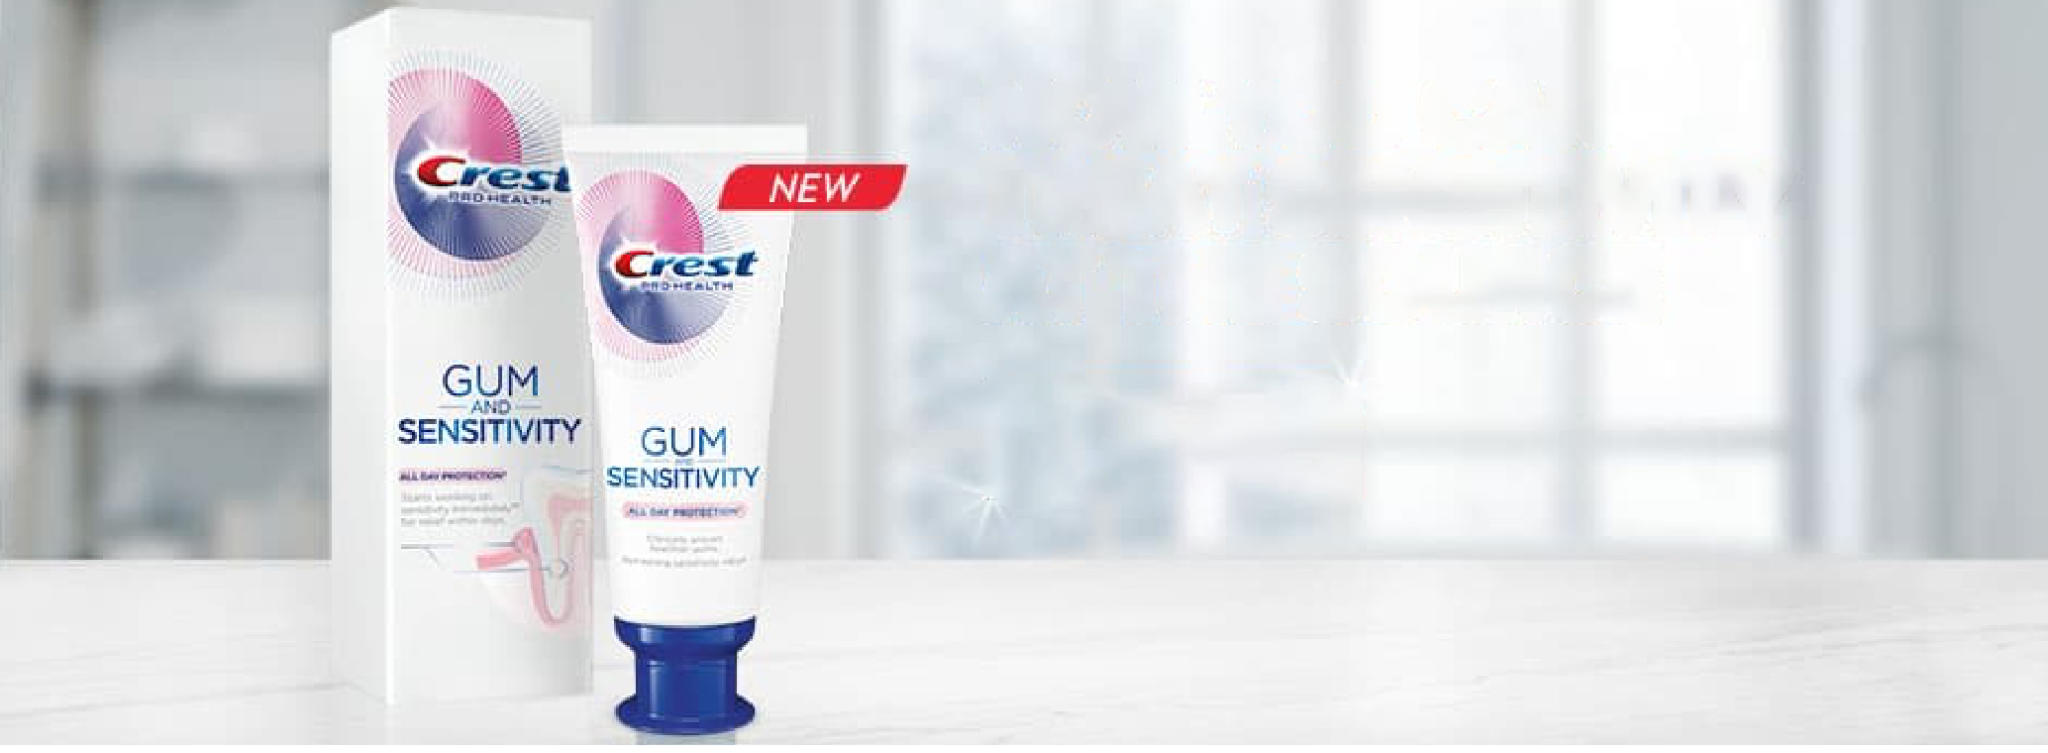 2 New Crest Gum and Sensitivity Toothpaste for Sensitive Teeth@2x